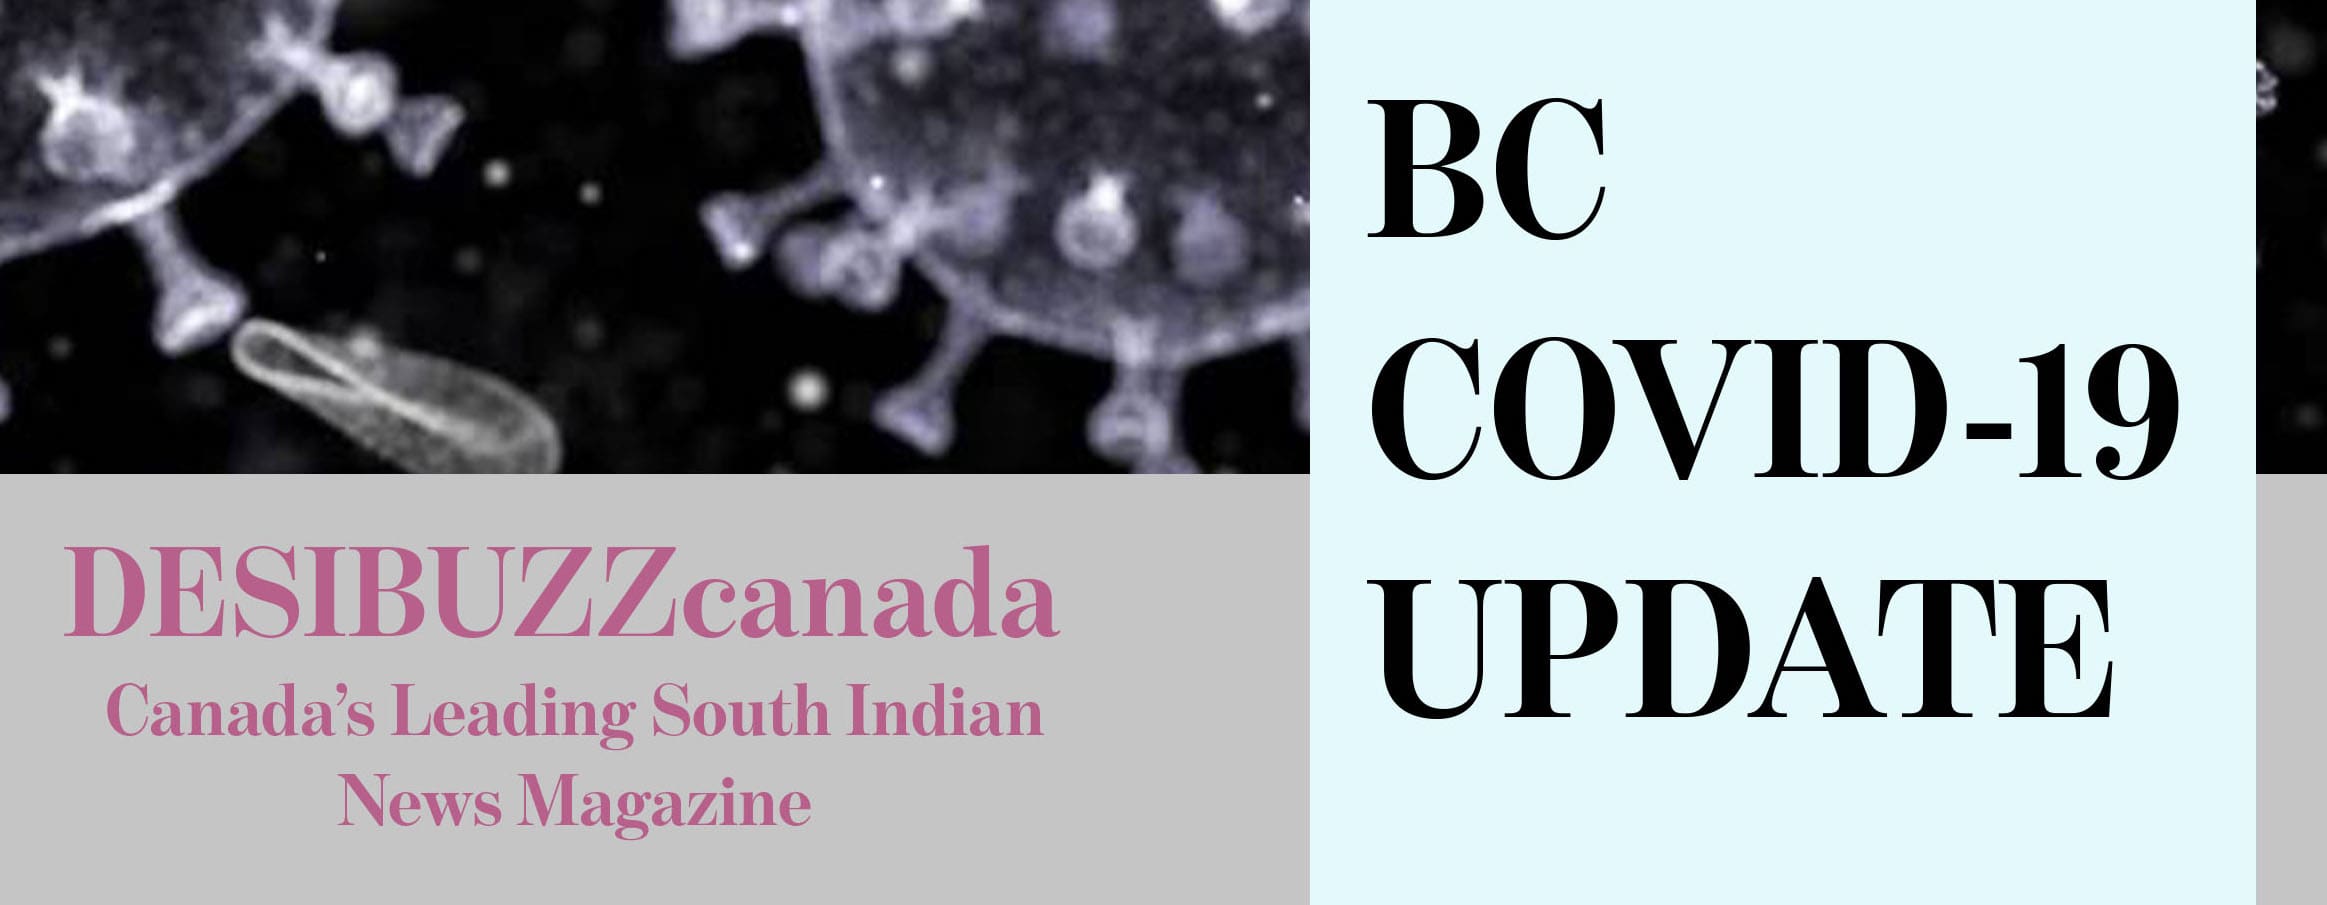 BC COVID-19 DAILY UPDATE: Cases Again Rise Above 700 With Seven New Deaths